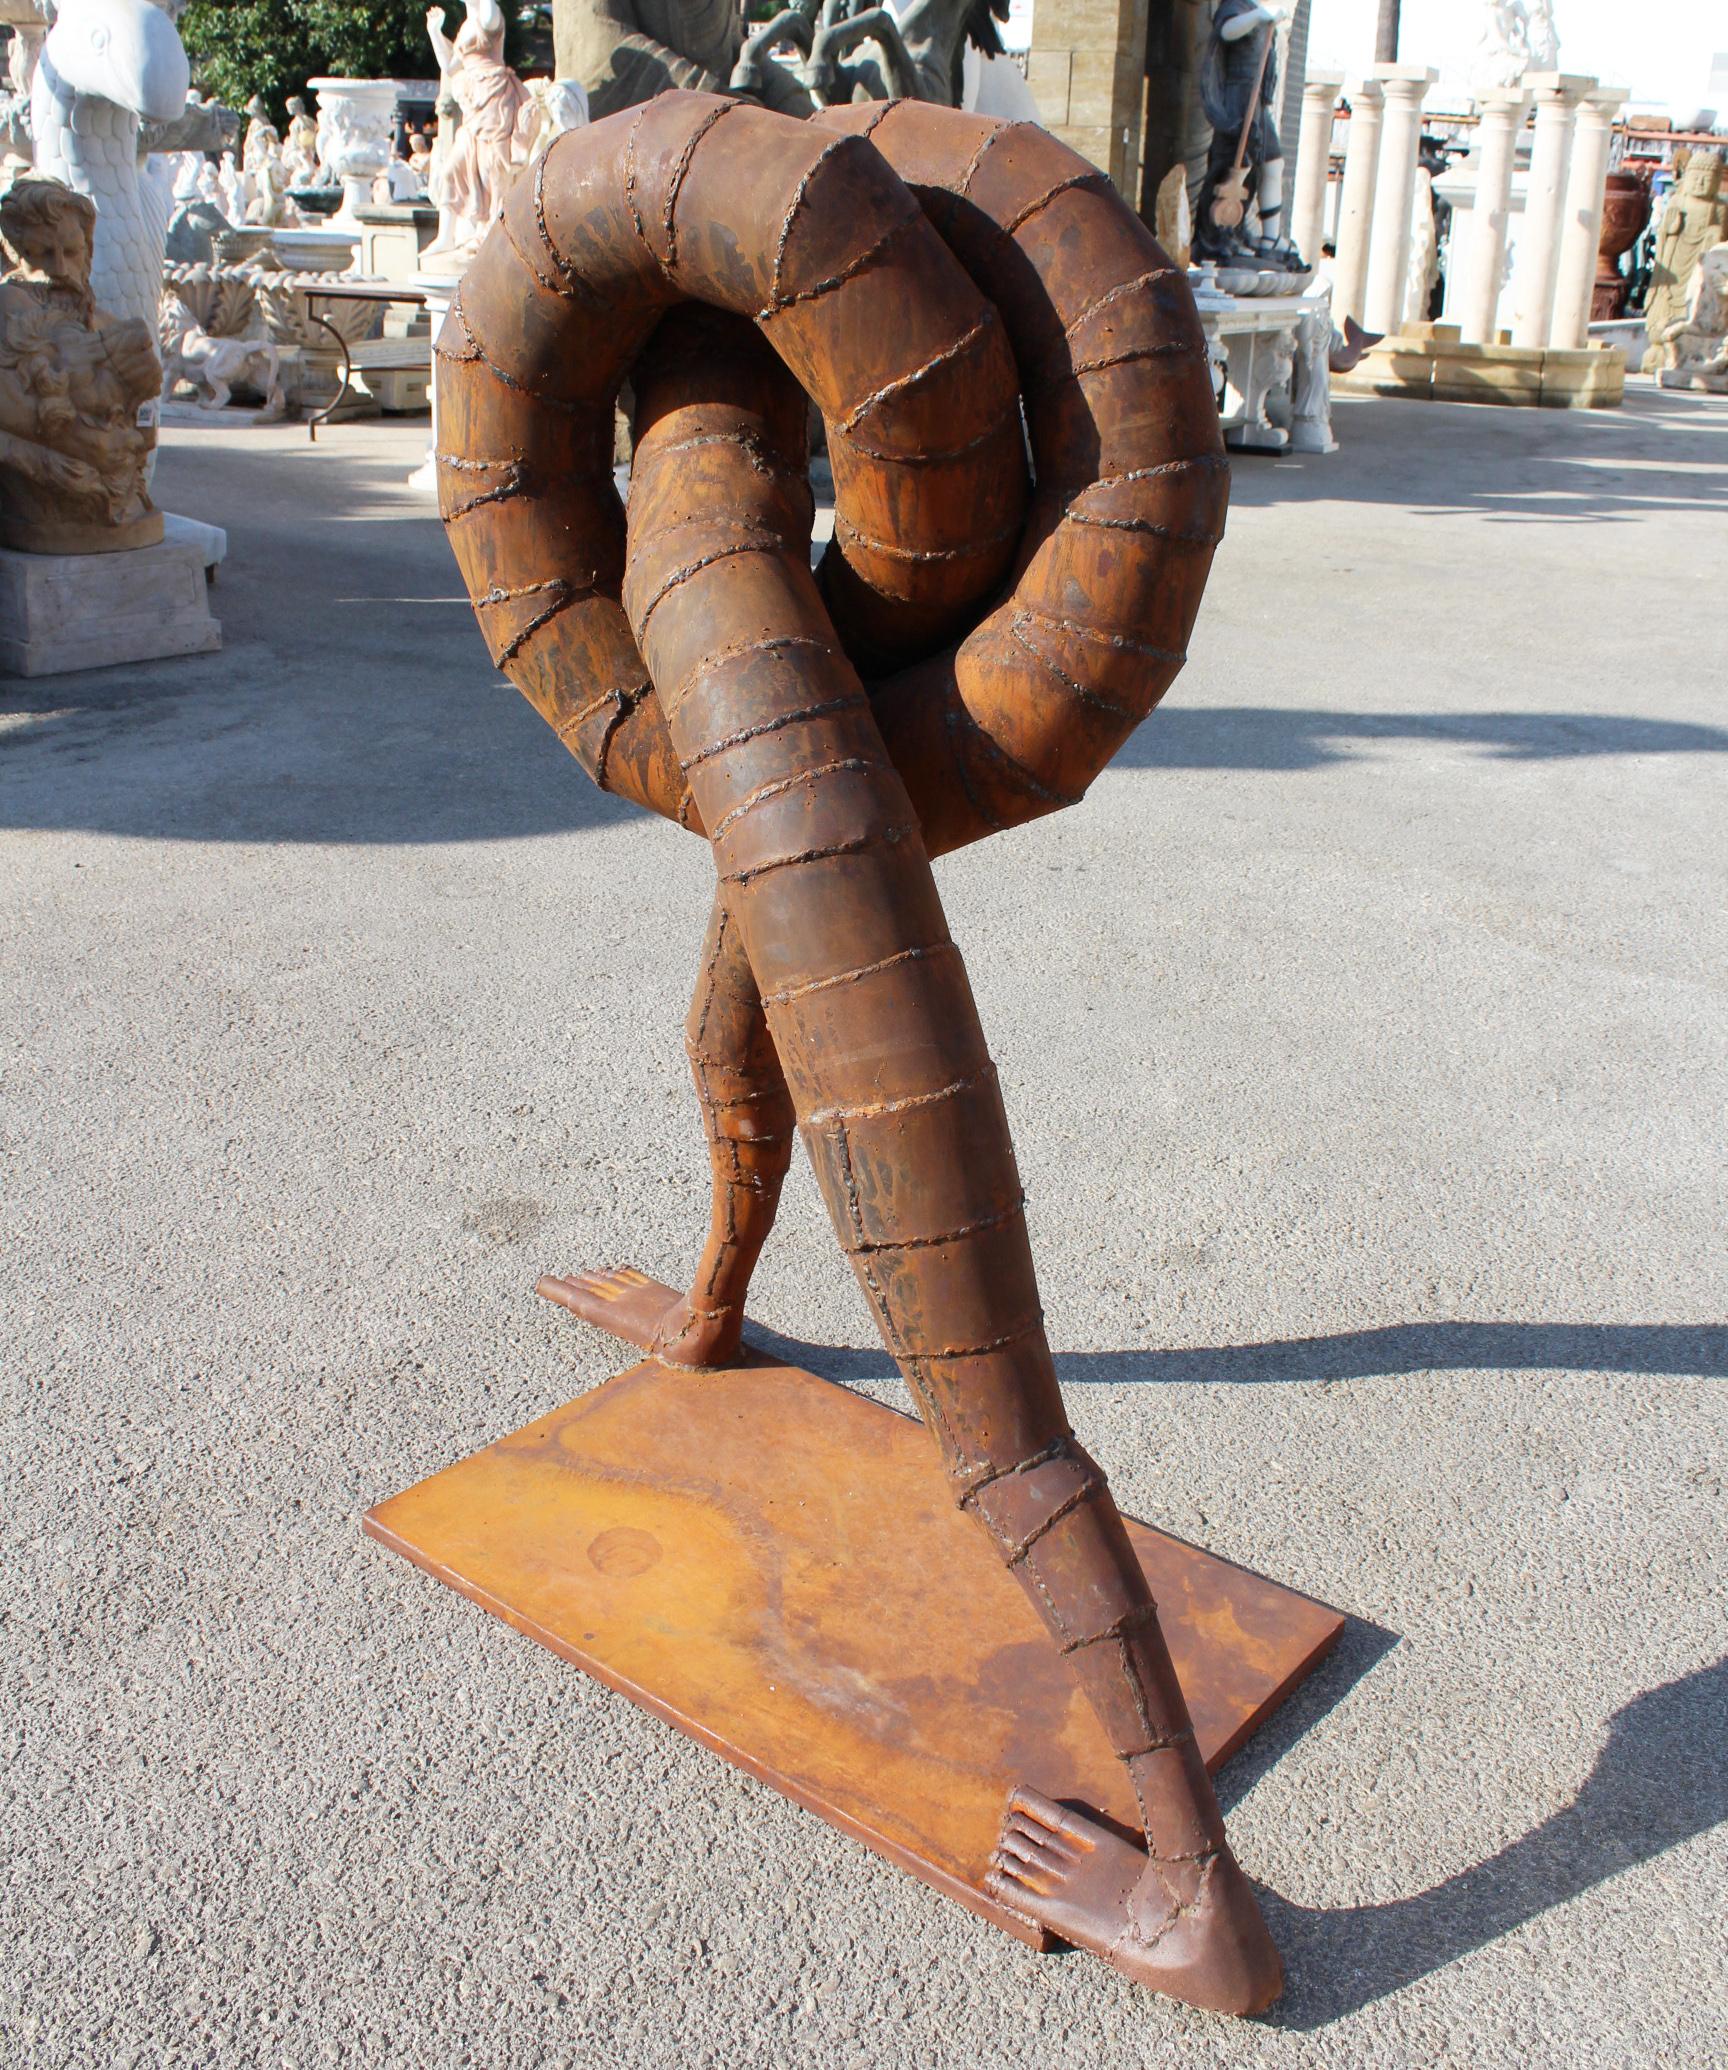 Spanish Surrealist Iron Sculpture Where Intertwined Legs Form the Body